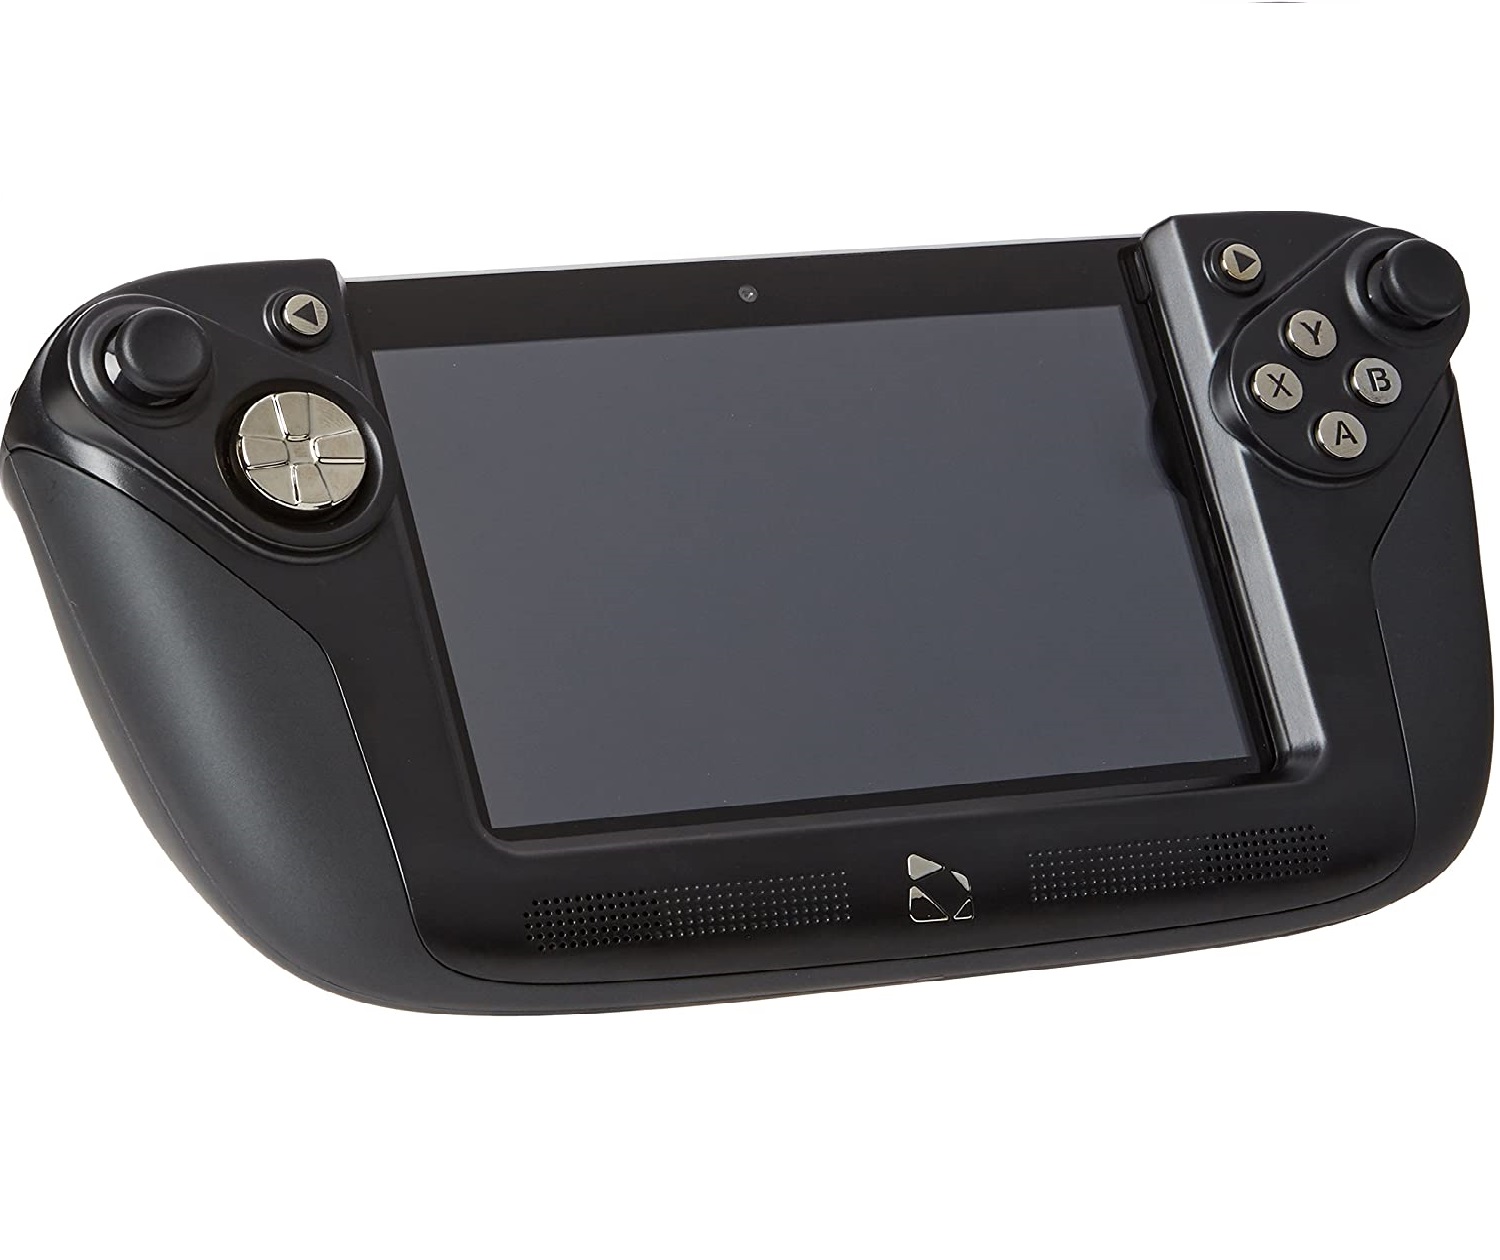 Wikipad 7, Gaming Tablet and Controller, TAB7INCH